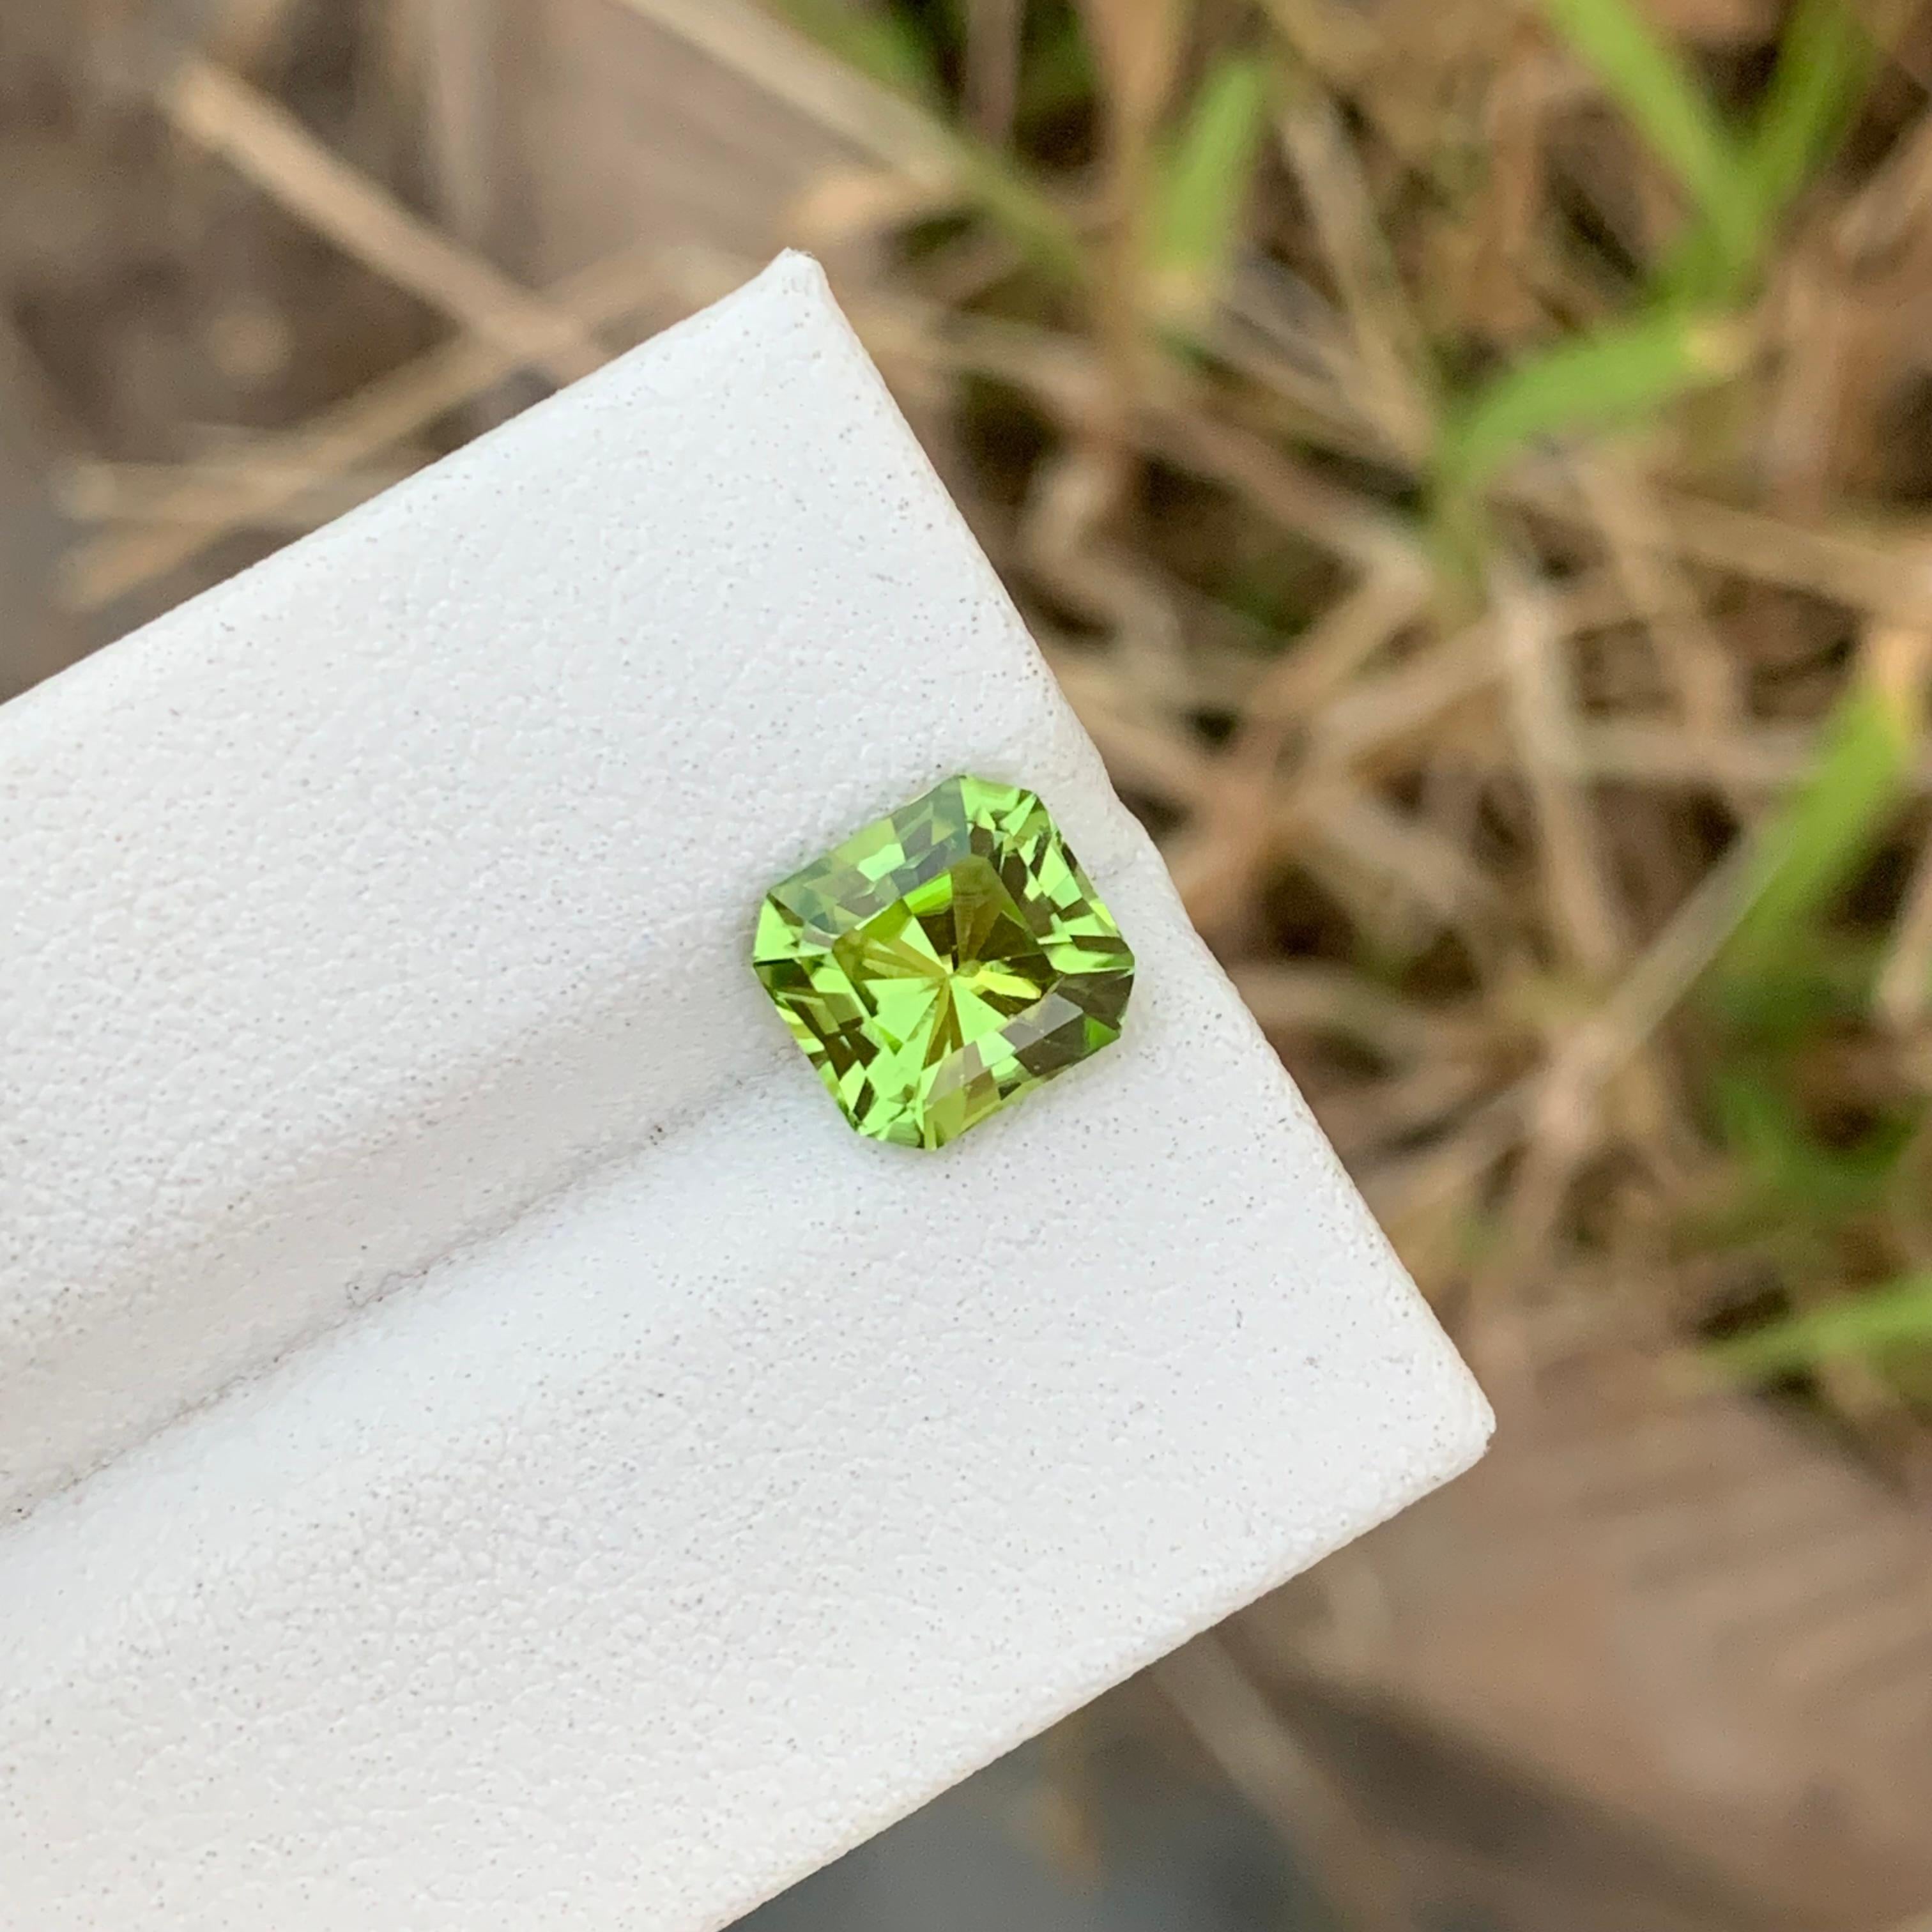 Loose Peridot
Weight: 2.10 Carats
Dimension: 7.7 x 7.2 x 4.3 Mm
Colour: Green
Origin: Supat Valley, Pakistan
Shape: Emerald 
Certificate: On Demand
Treatment: Non

Peridot, a vibrant and lustrous gemstone, has been cherished for centuries for its